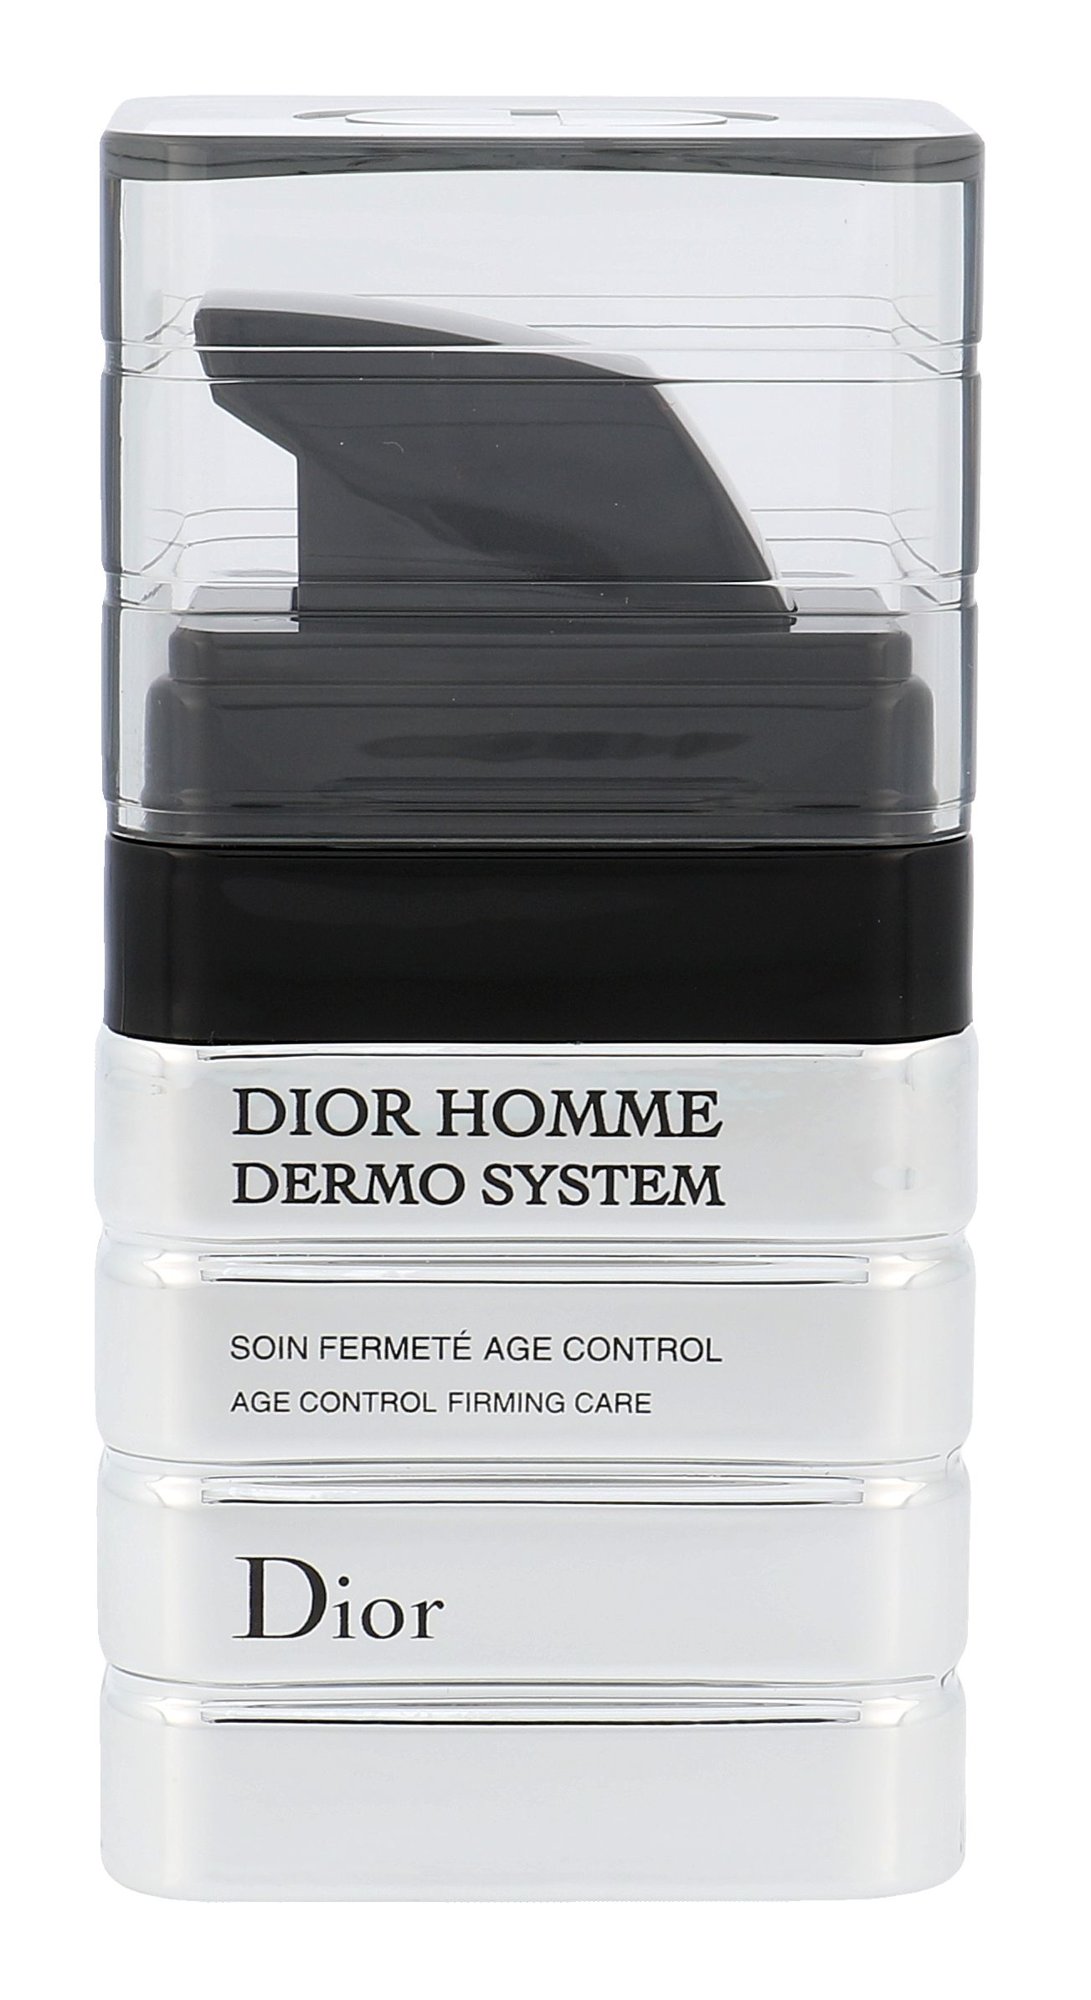 Christian Dior Homme Dermo System Age Control Firming Care veido gelis